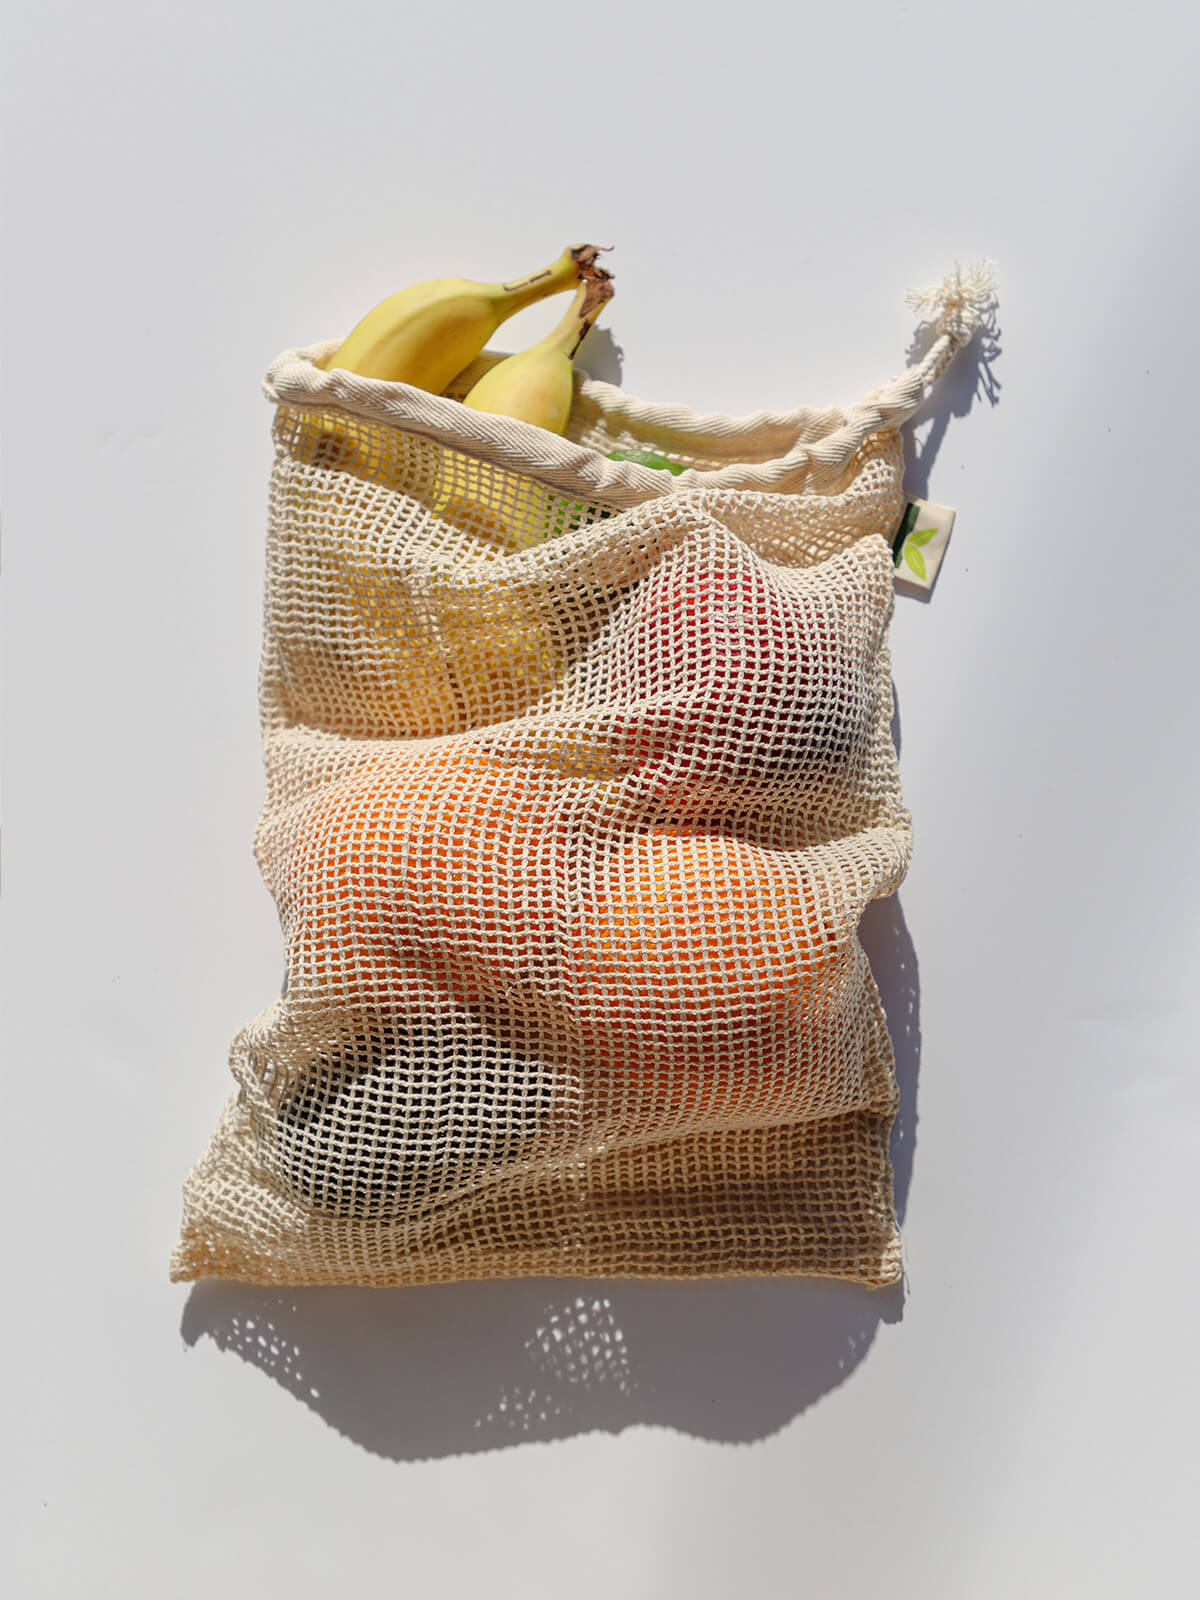 Eco-friendly produce bags